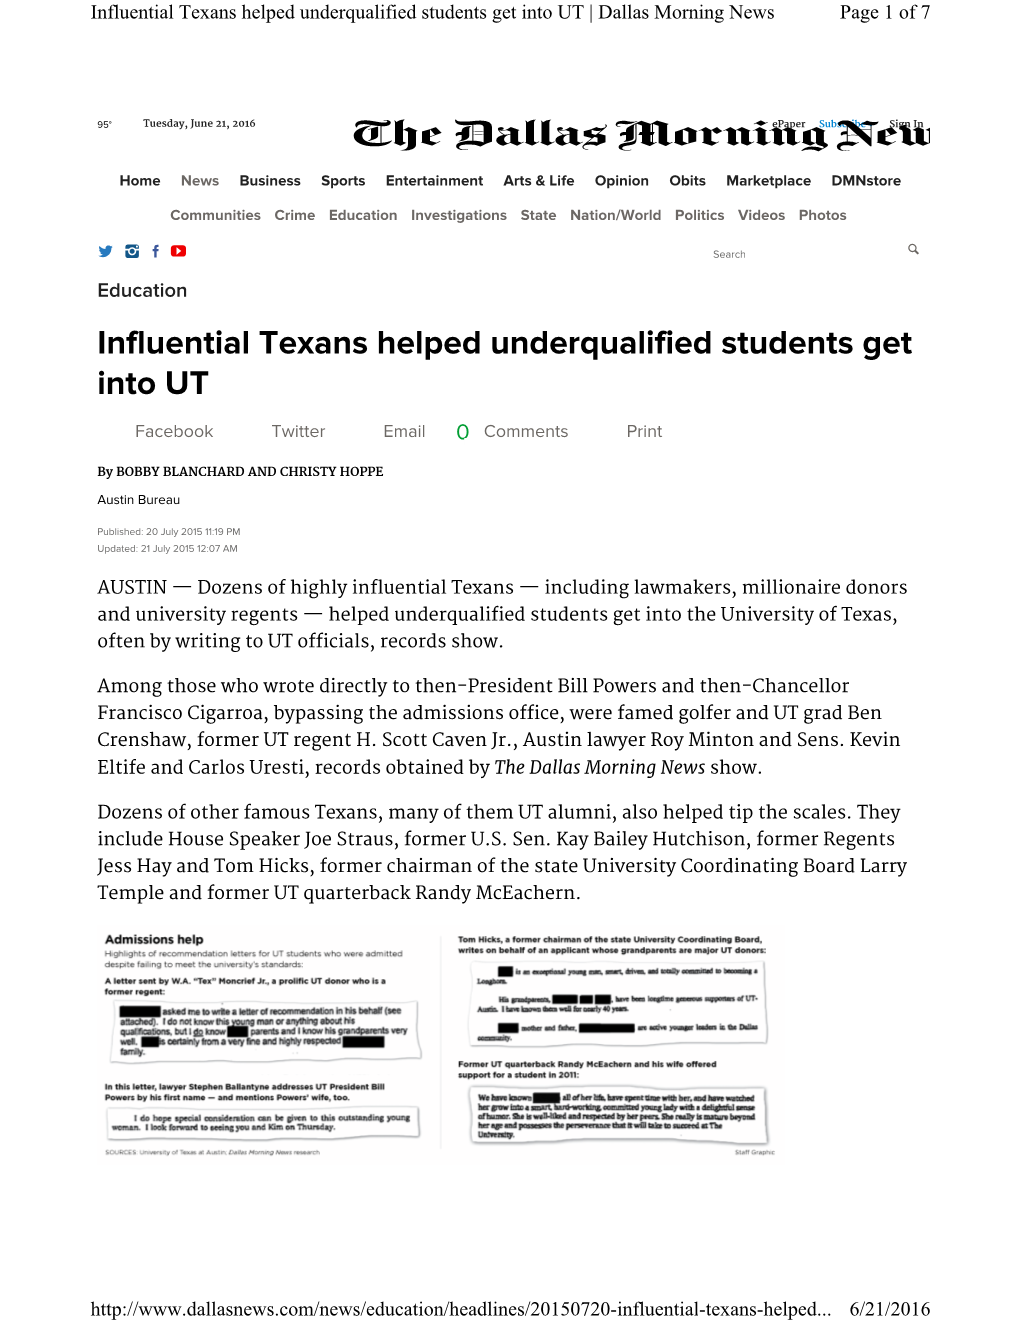 Influential Texans Helped Underqualified Students Get Into UT | Dallas Morning News Page 1 of 7